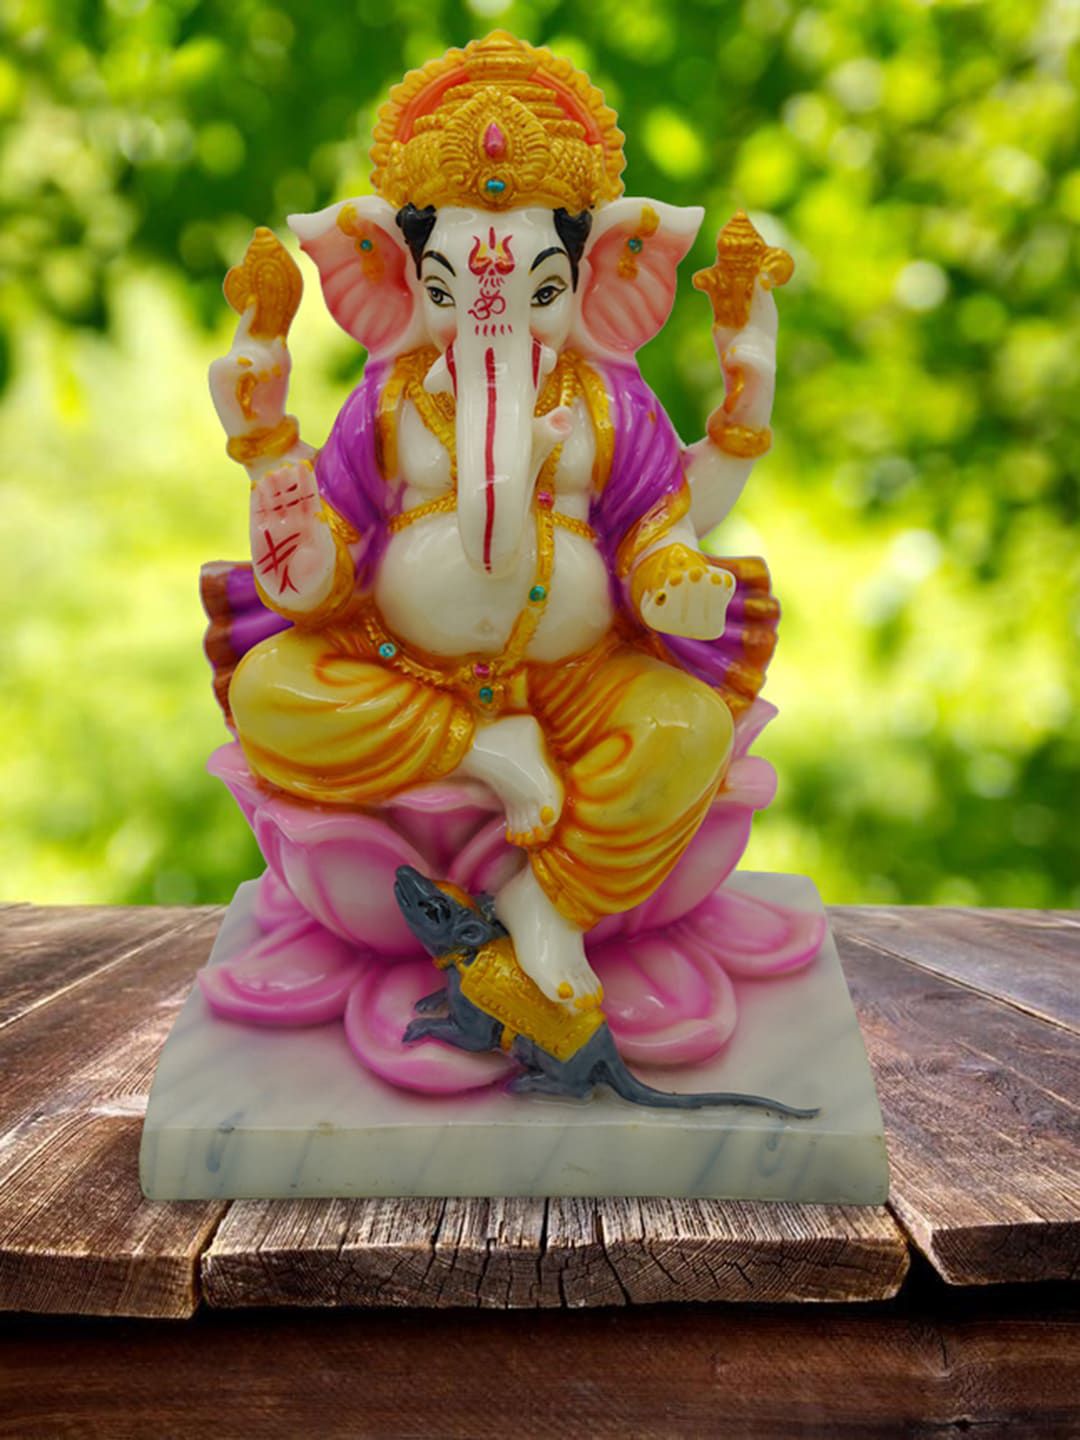 Gallery99 Beige & Pink Handpainted Lord Ganapati Idol Showpieces Price in India